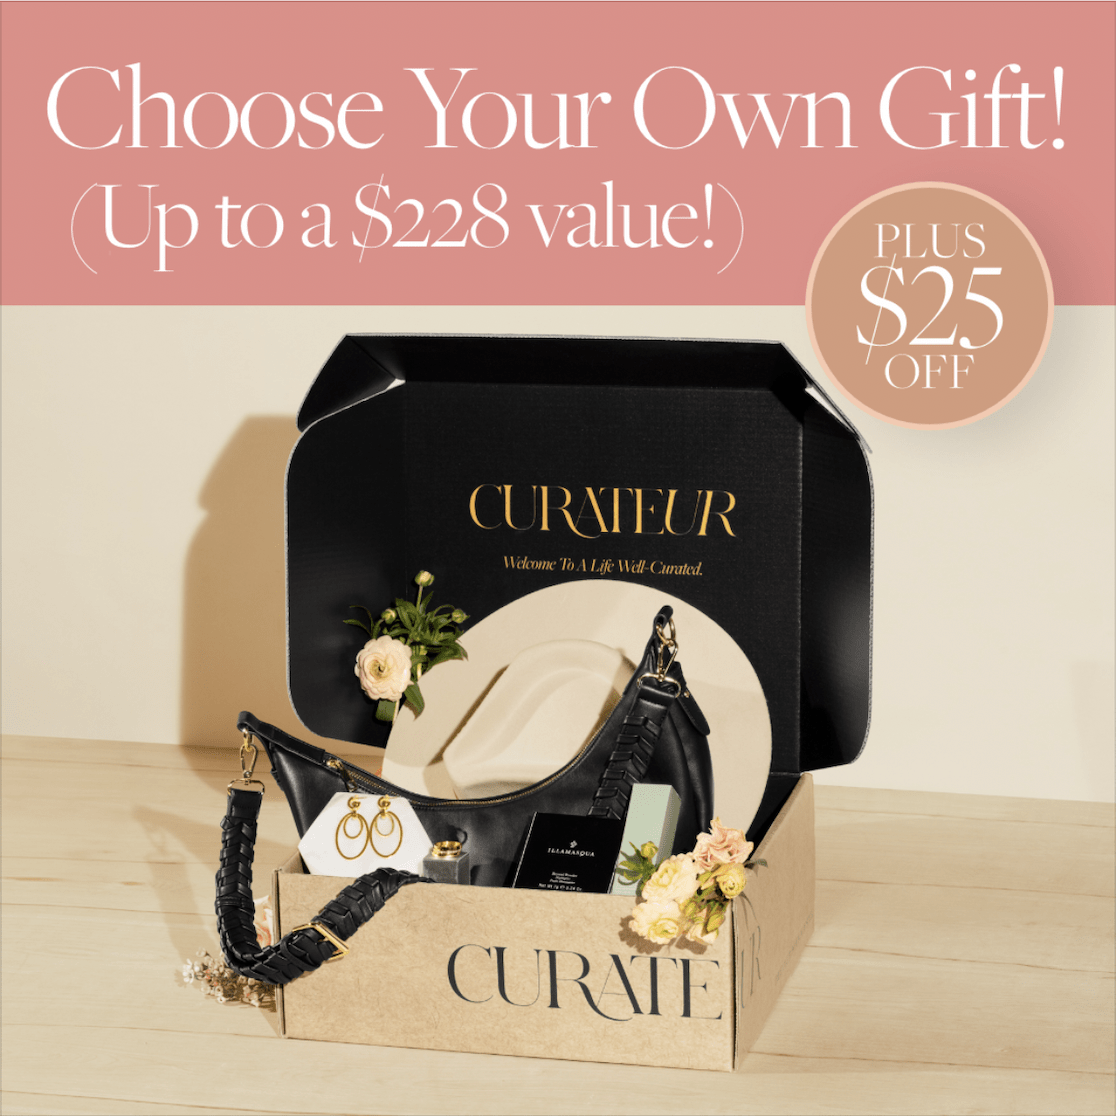 CURATEUR Spring 2021 Coupon Code – Save $25 + Your Choice of FREE Gift